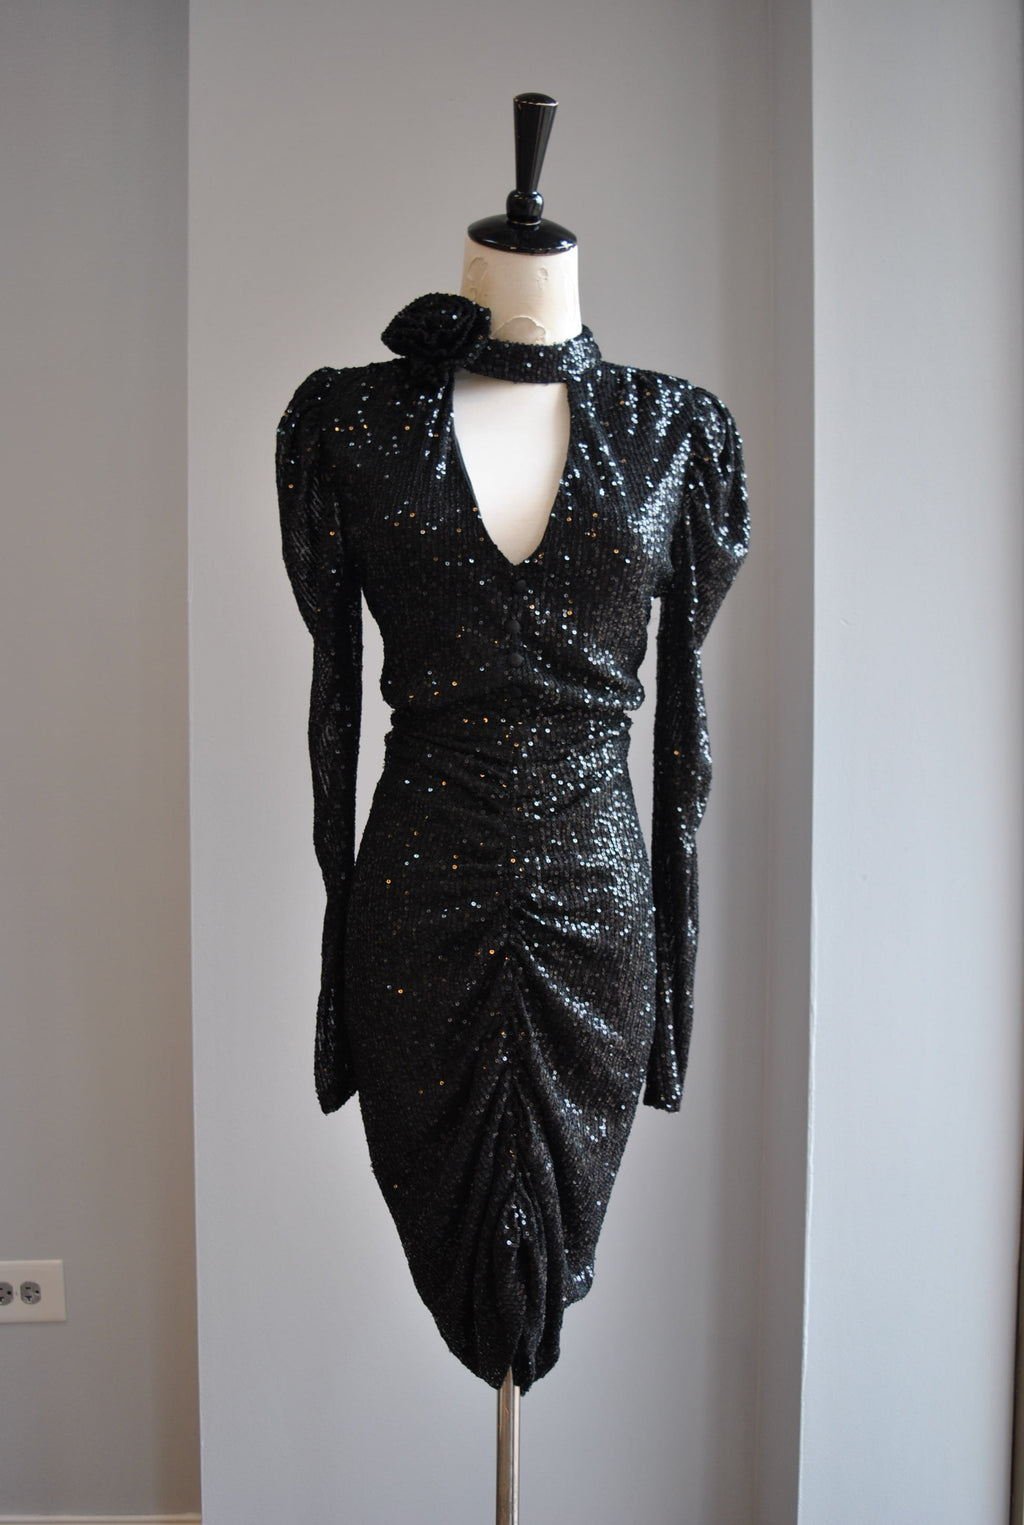 CLEARANCE - BLACK SEQUIN DRESS WITH A FLOWER